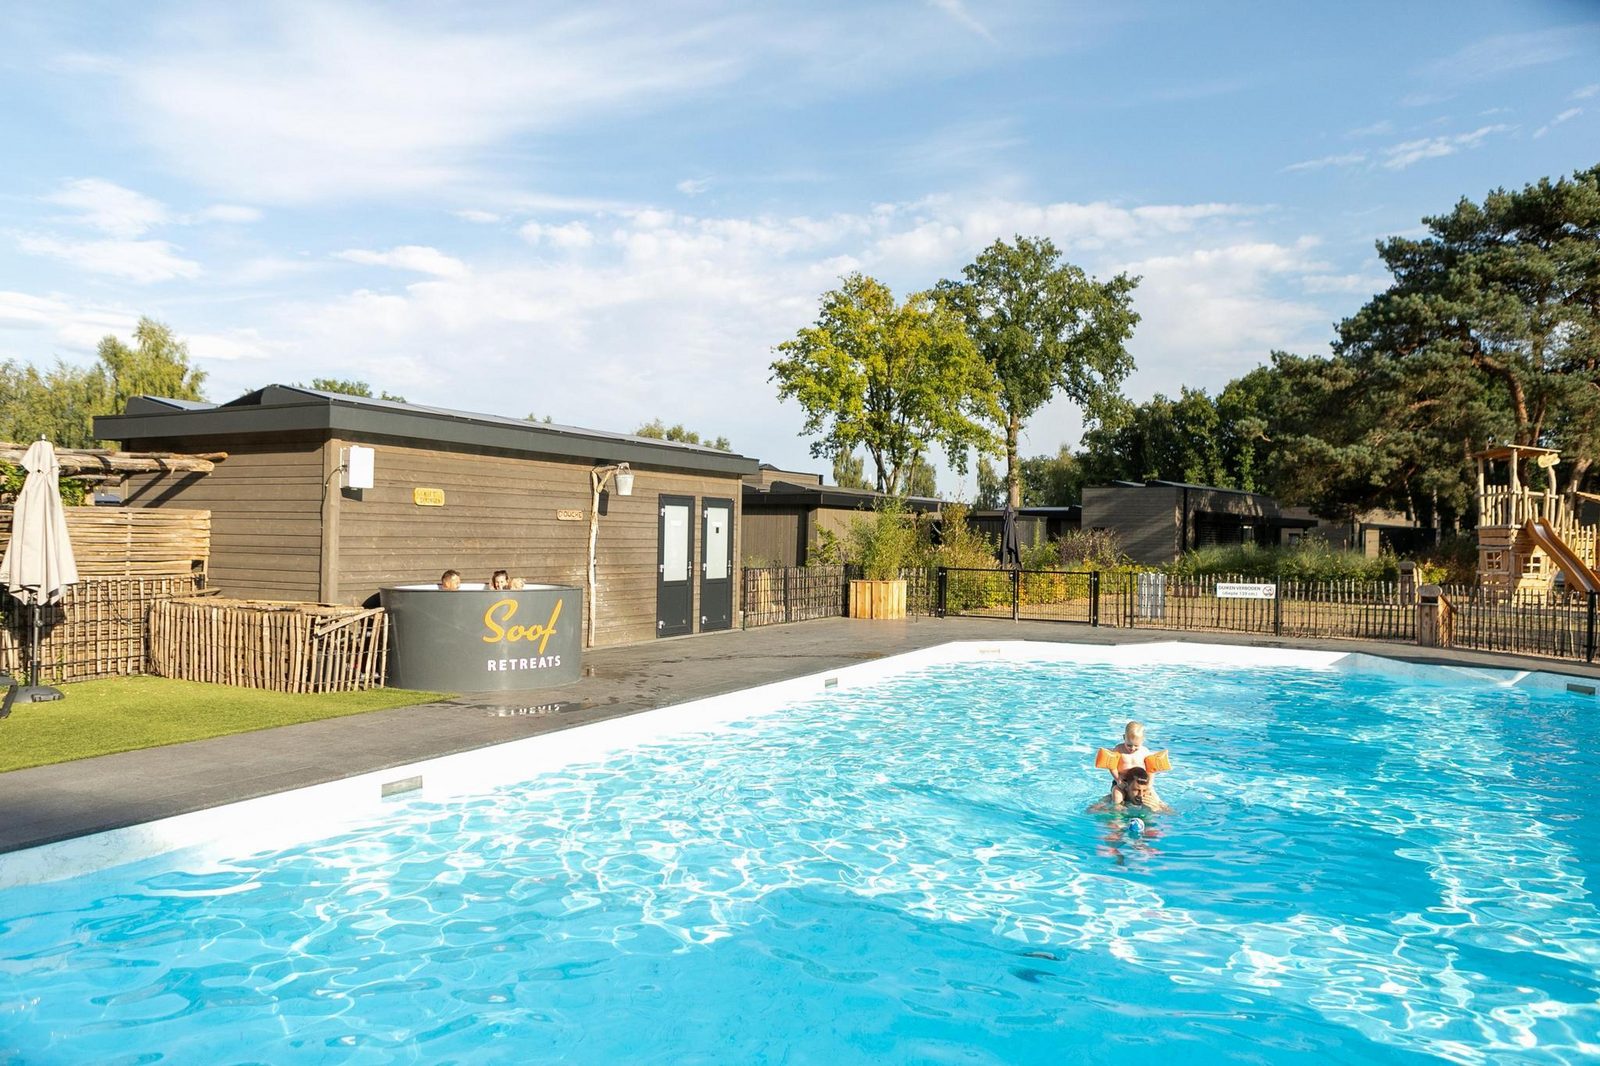 Luxury Family Lodges for 12 with hot tub